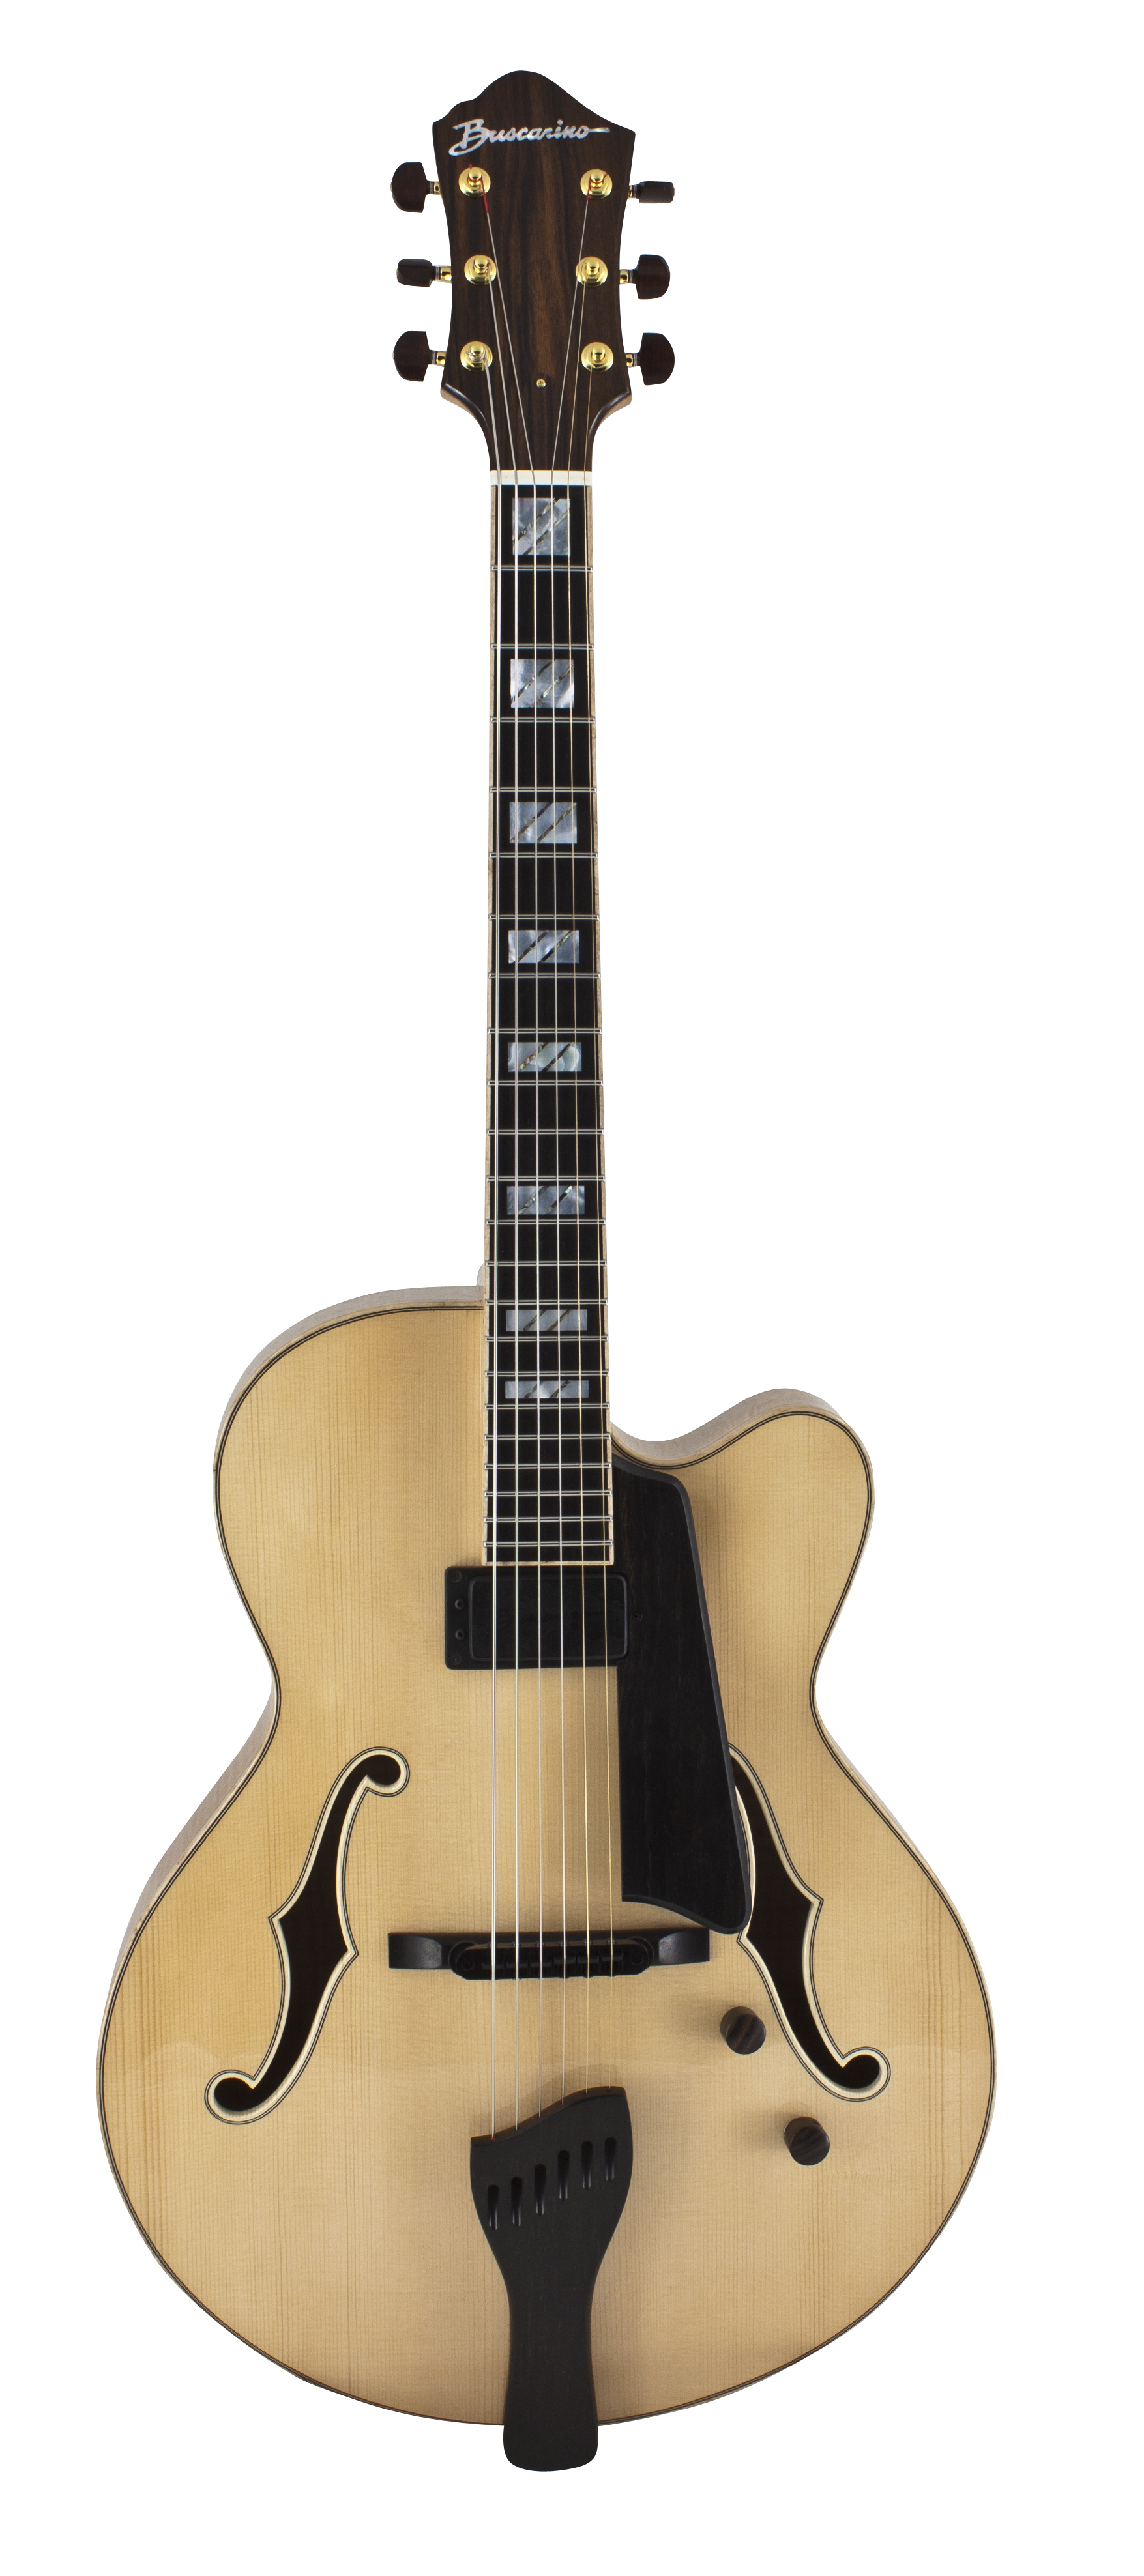 The Prodigy Archtop